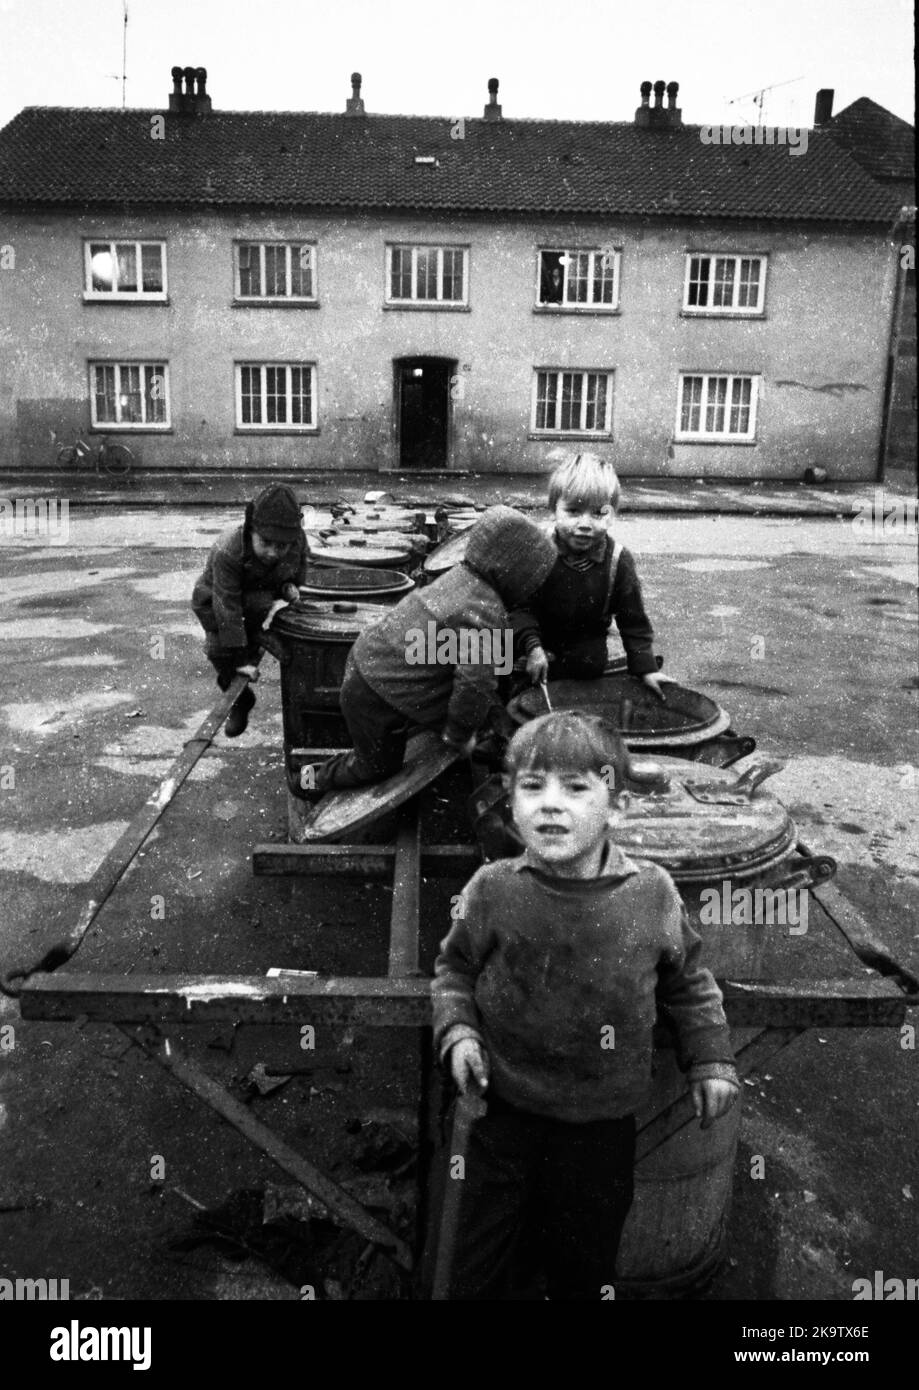 Life, poverty and child wealth in a homeless shelter on 13. 12. 1971 in the pre-Christmas period in Essen, Germany Stock Photo